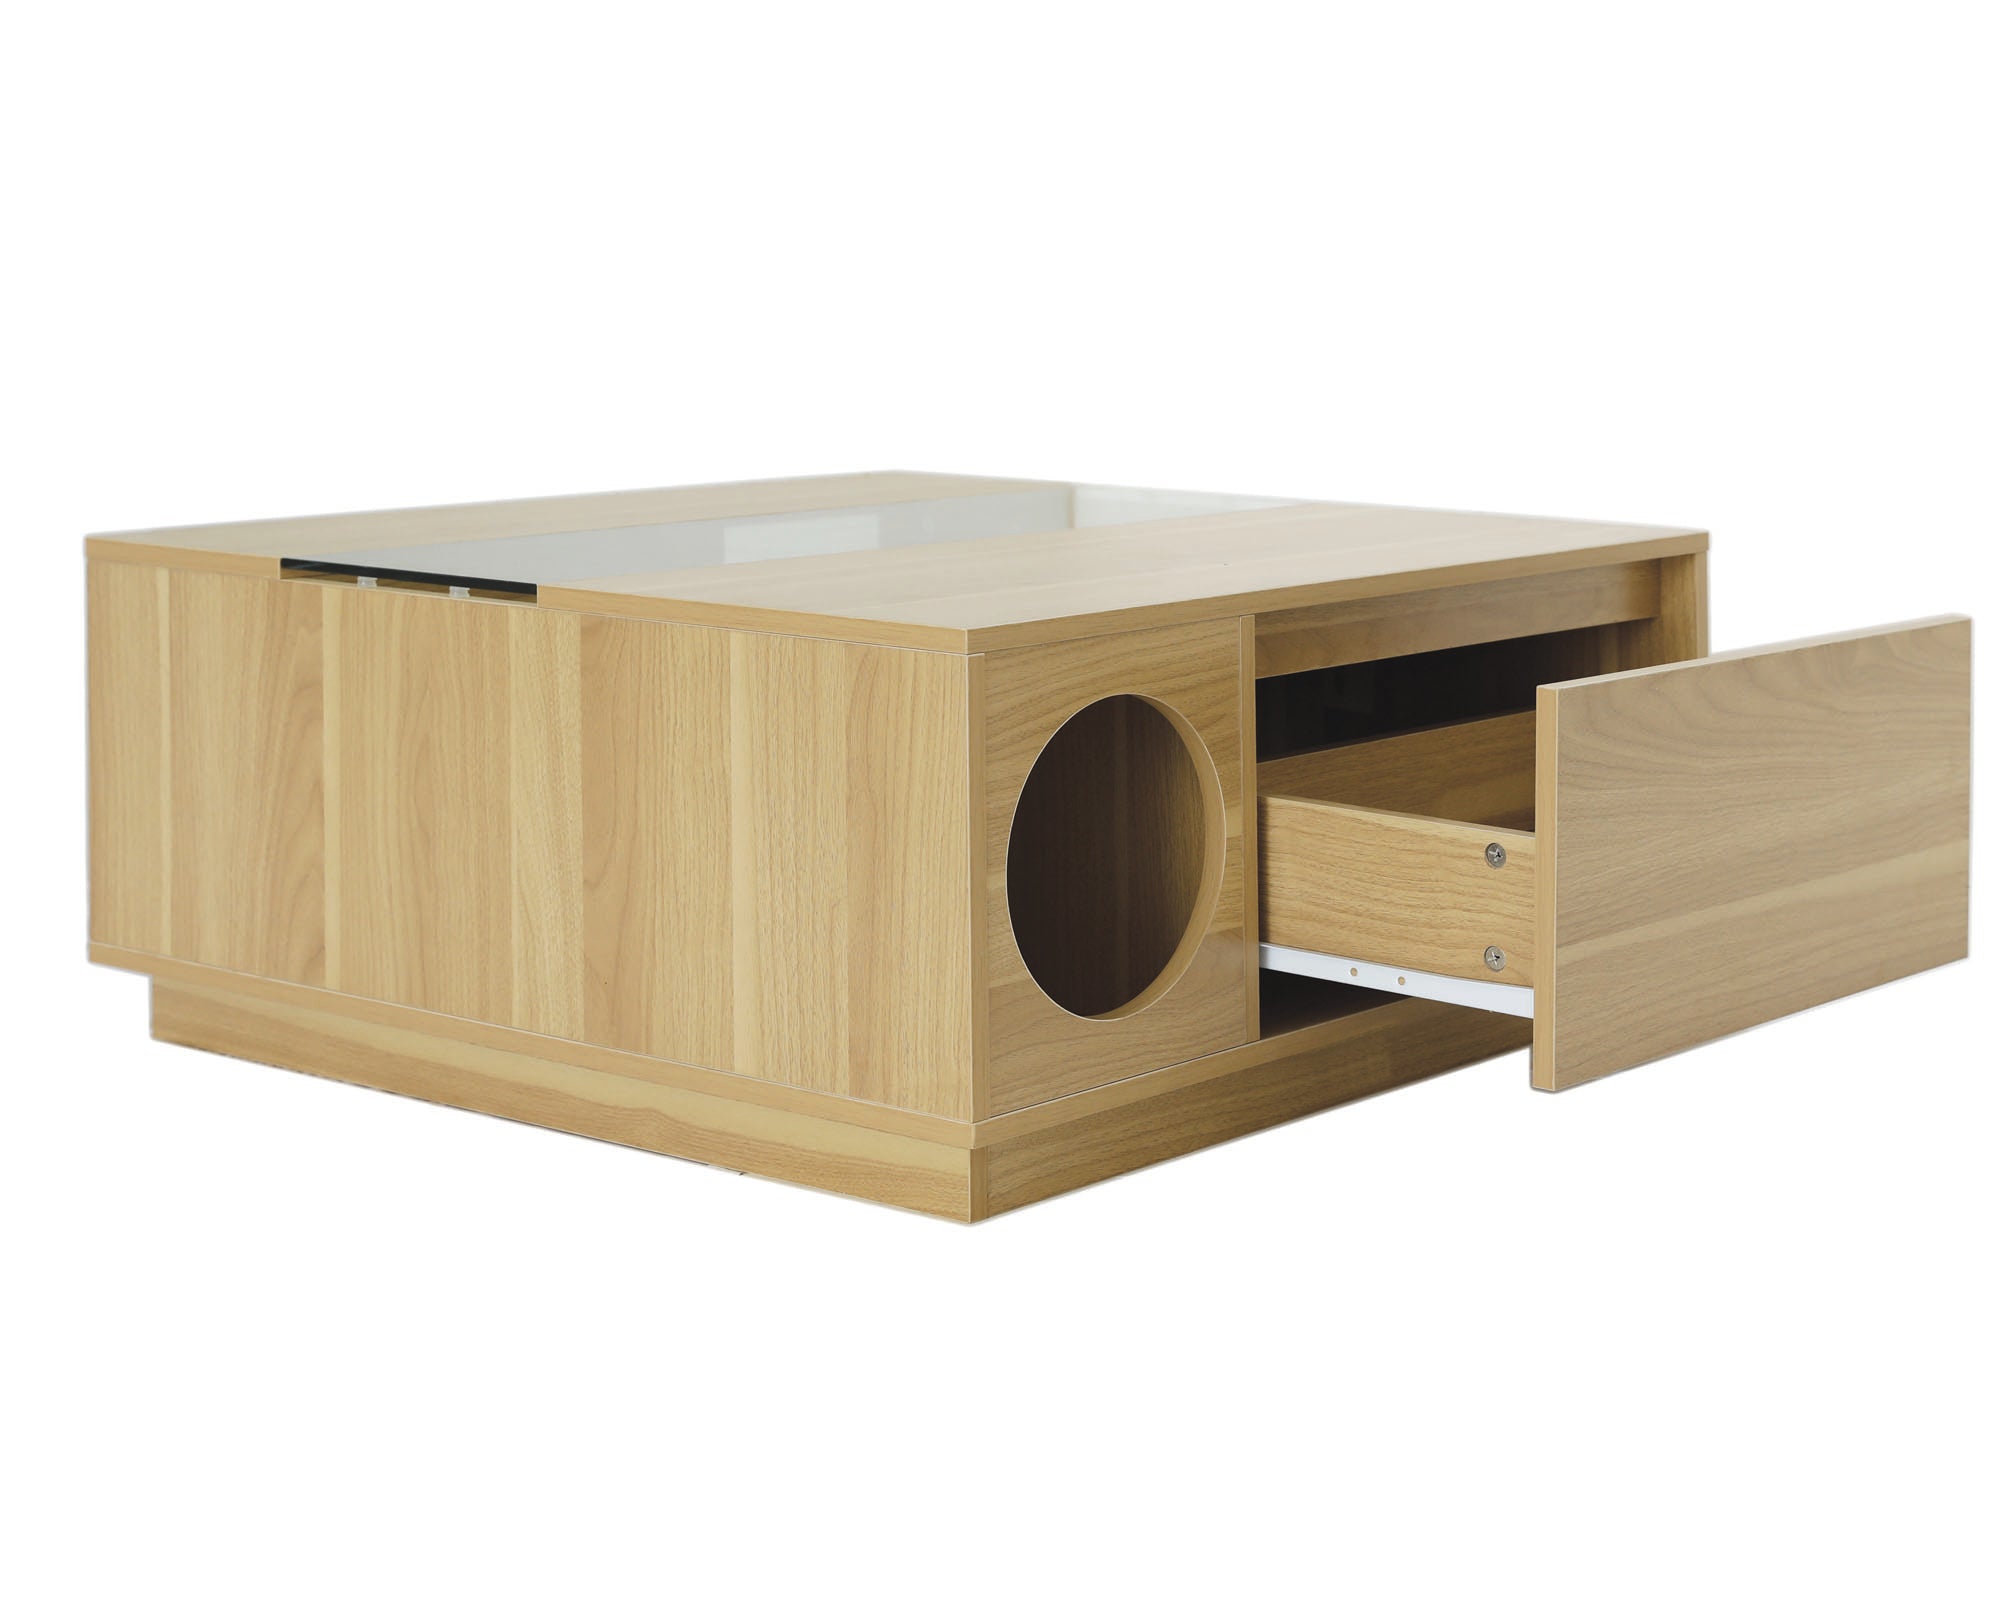 4Catsndogs Coffee Table - Coco